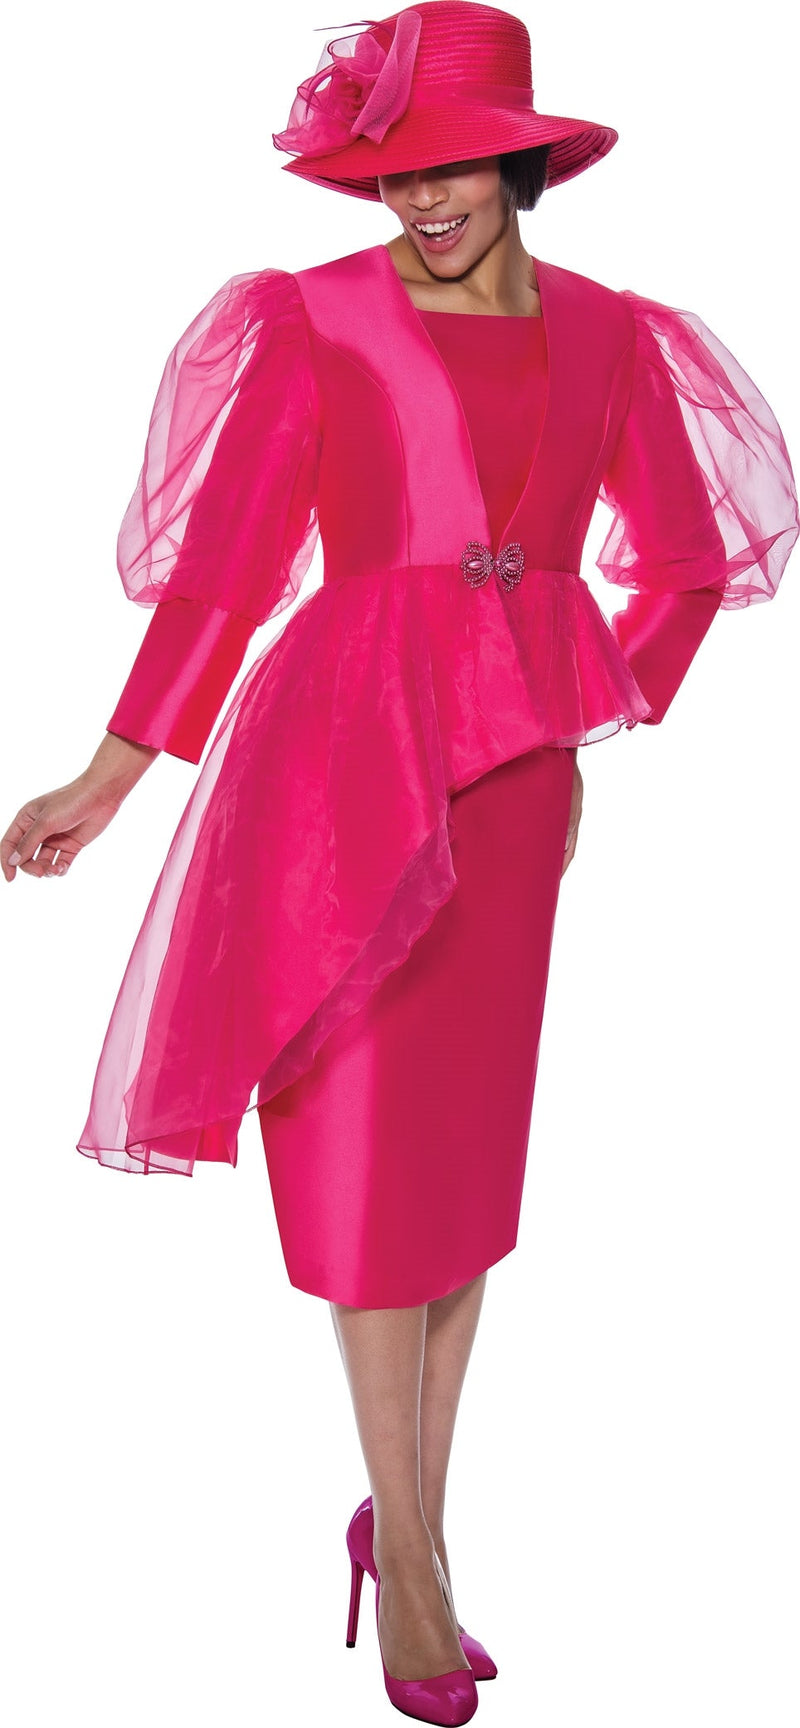 GMI Church Suit 9762-Hot Pink - Church Suits For Less